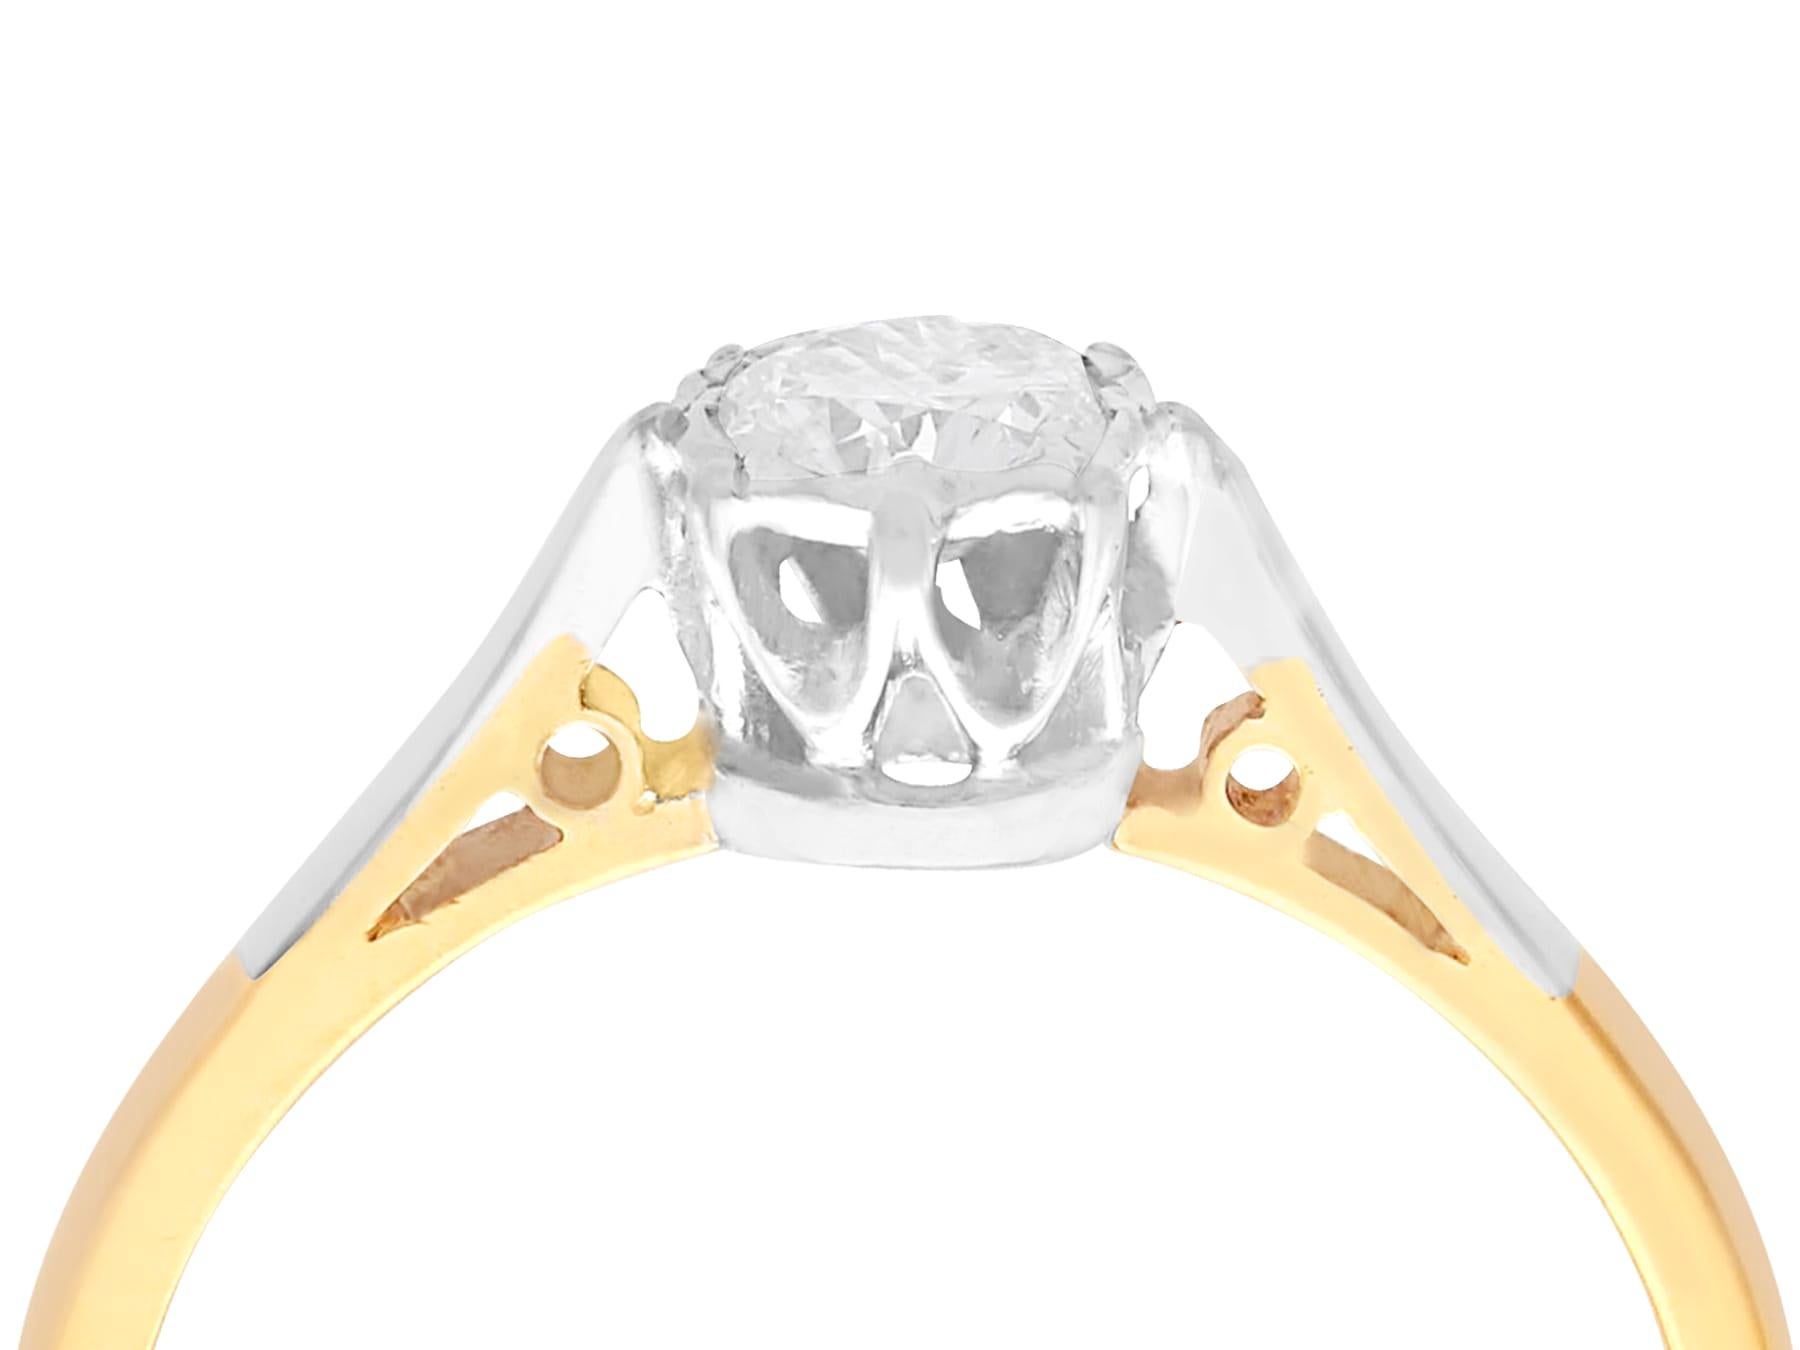 A fine and impressive platinum set vintage 0.35 carat diamond solitaire ring in 18 karat yellow gold; part of our diamond jewellery and estate jewelry collections.

This impressive vintage 1960s diamond engagement ring has been crafted in 18k yellow